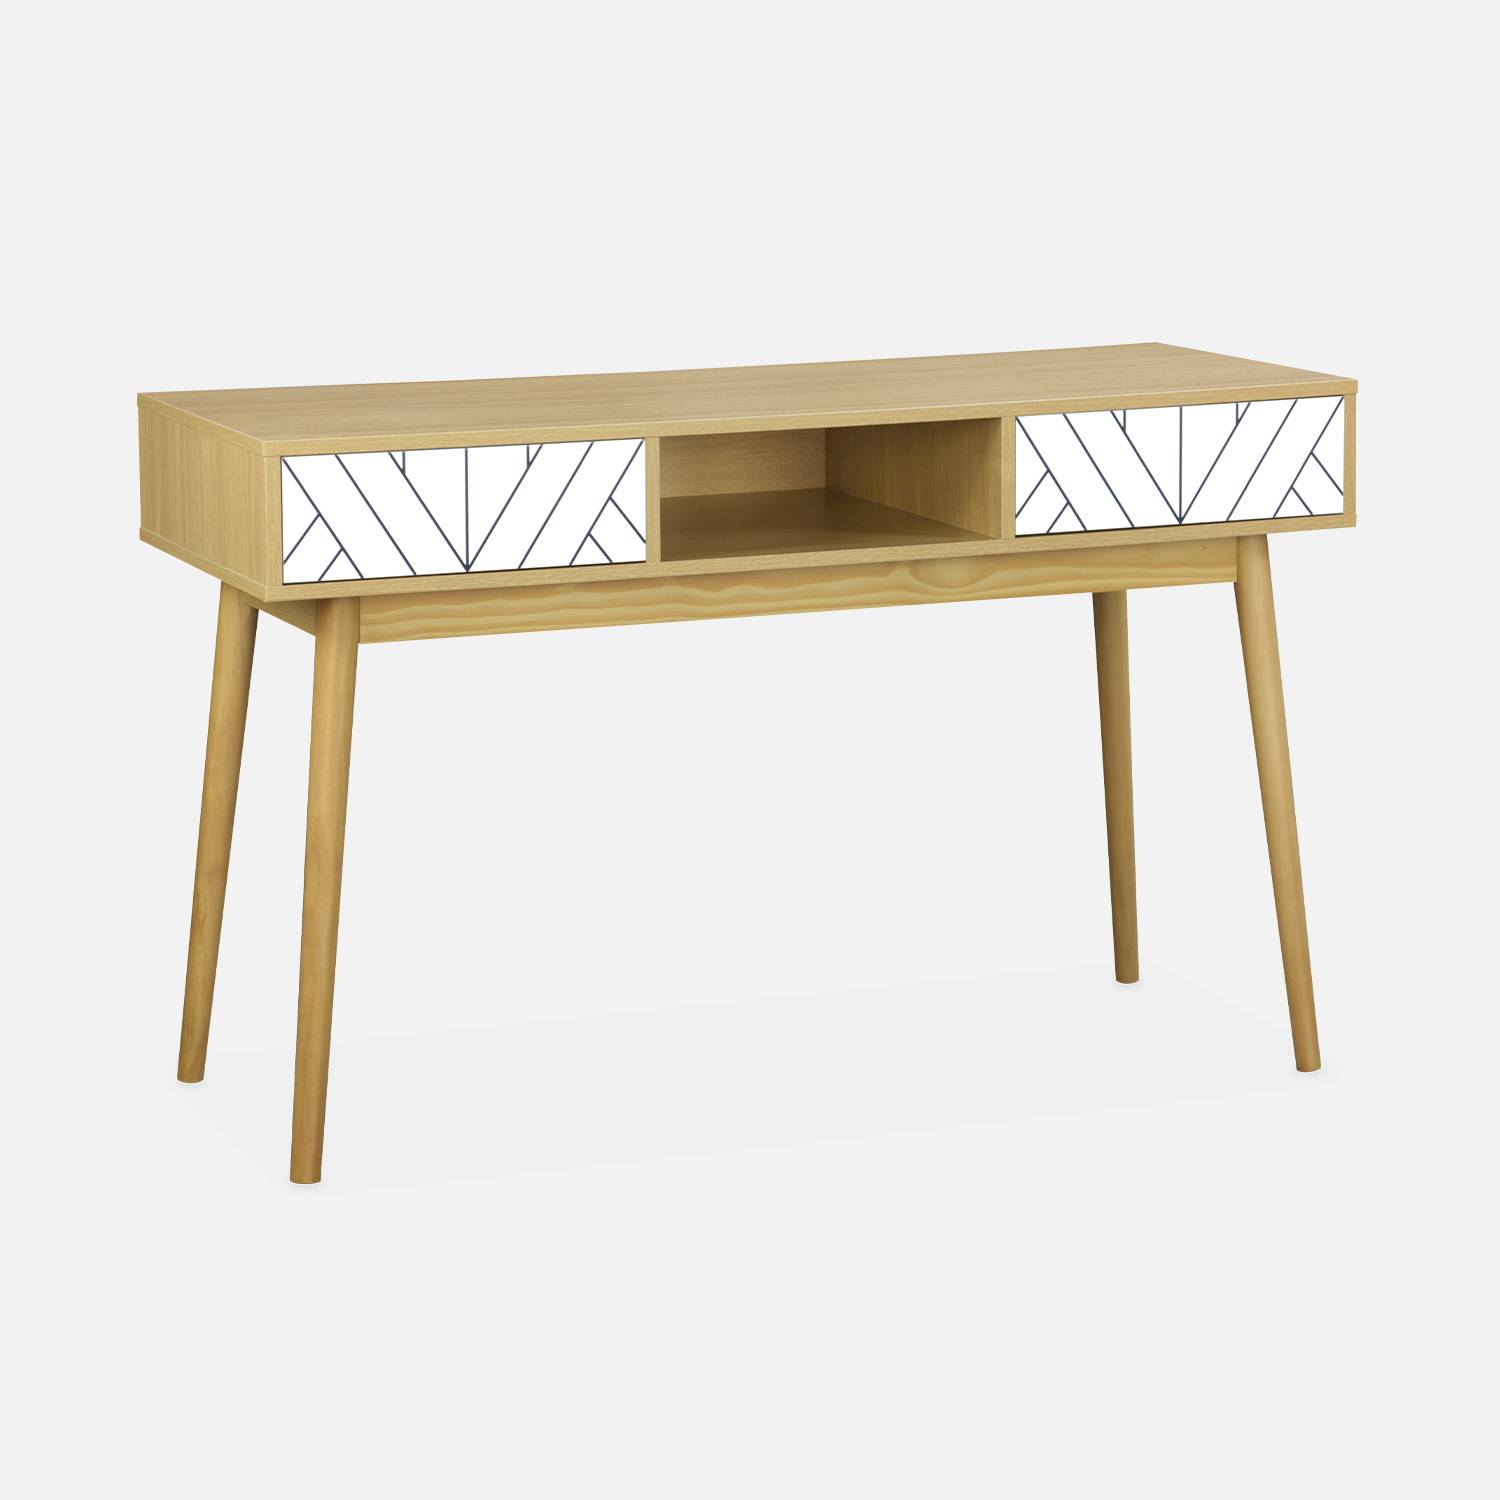 Wood-effect console table with two drawers and one storage nook, 120x48x75cm - Mika - White,sweeek,Photo5